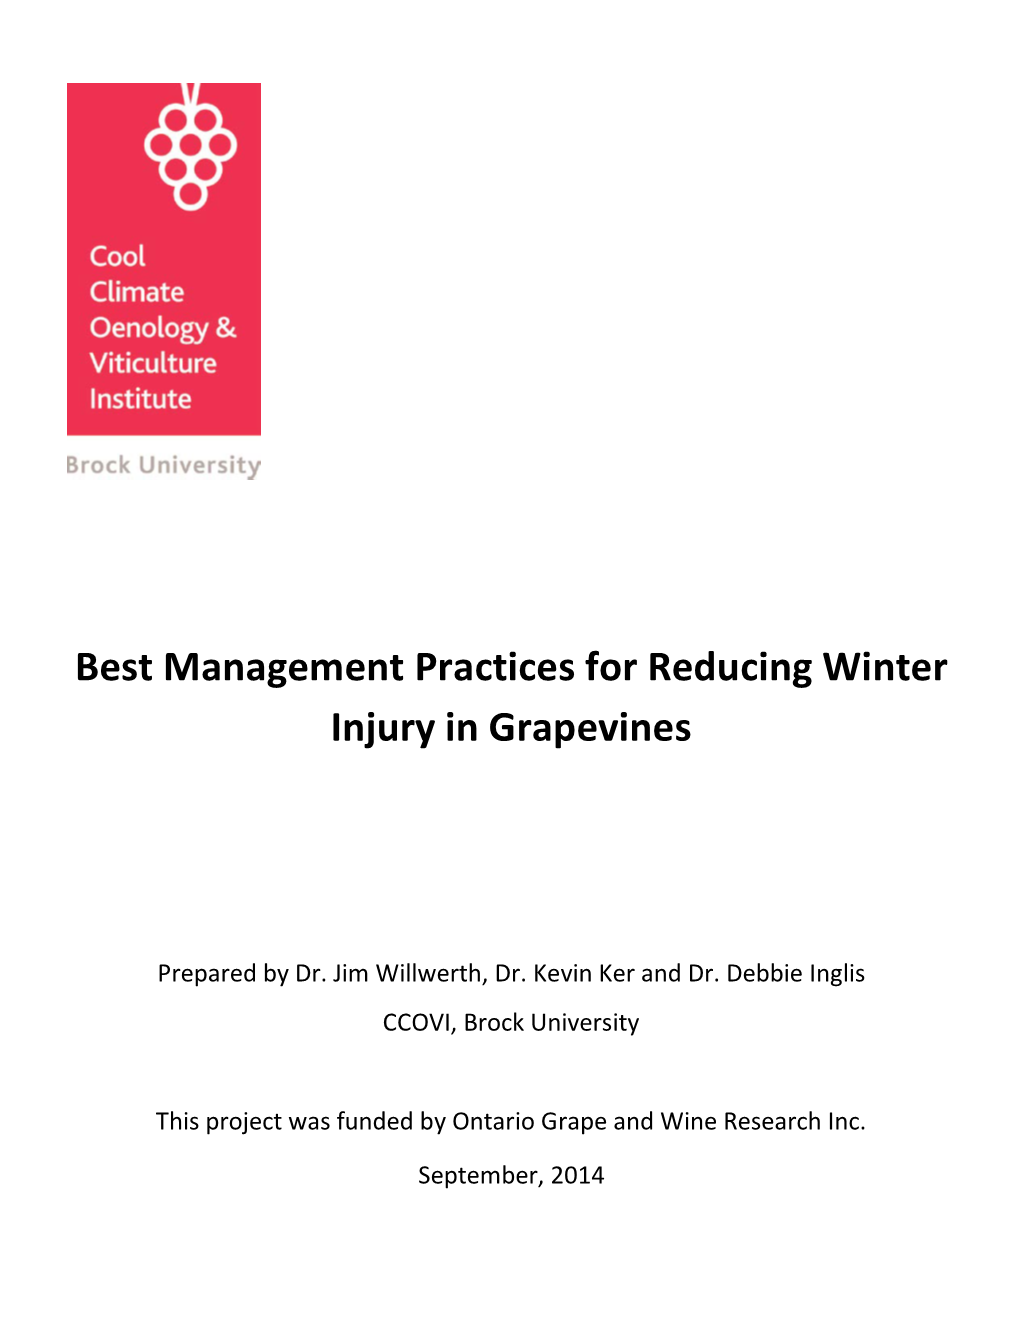 Best Practices Guide for Reducing Winter Injury in Grapevines